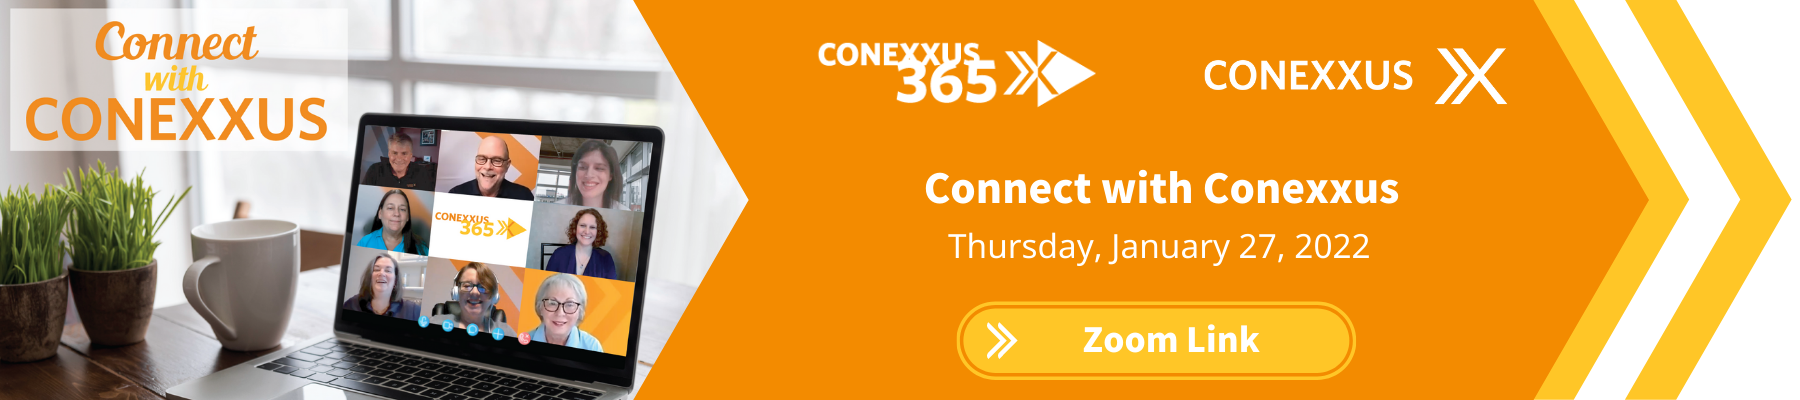 Connect with Conexxus 